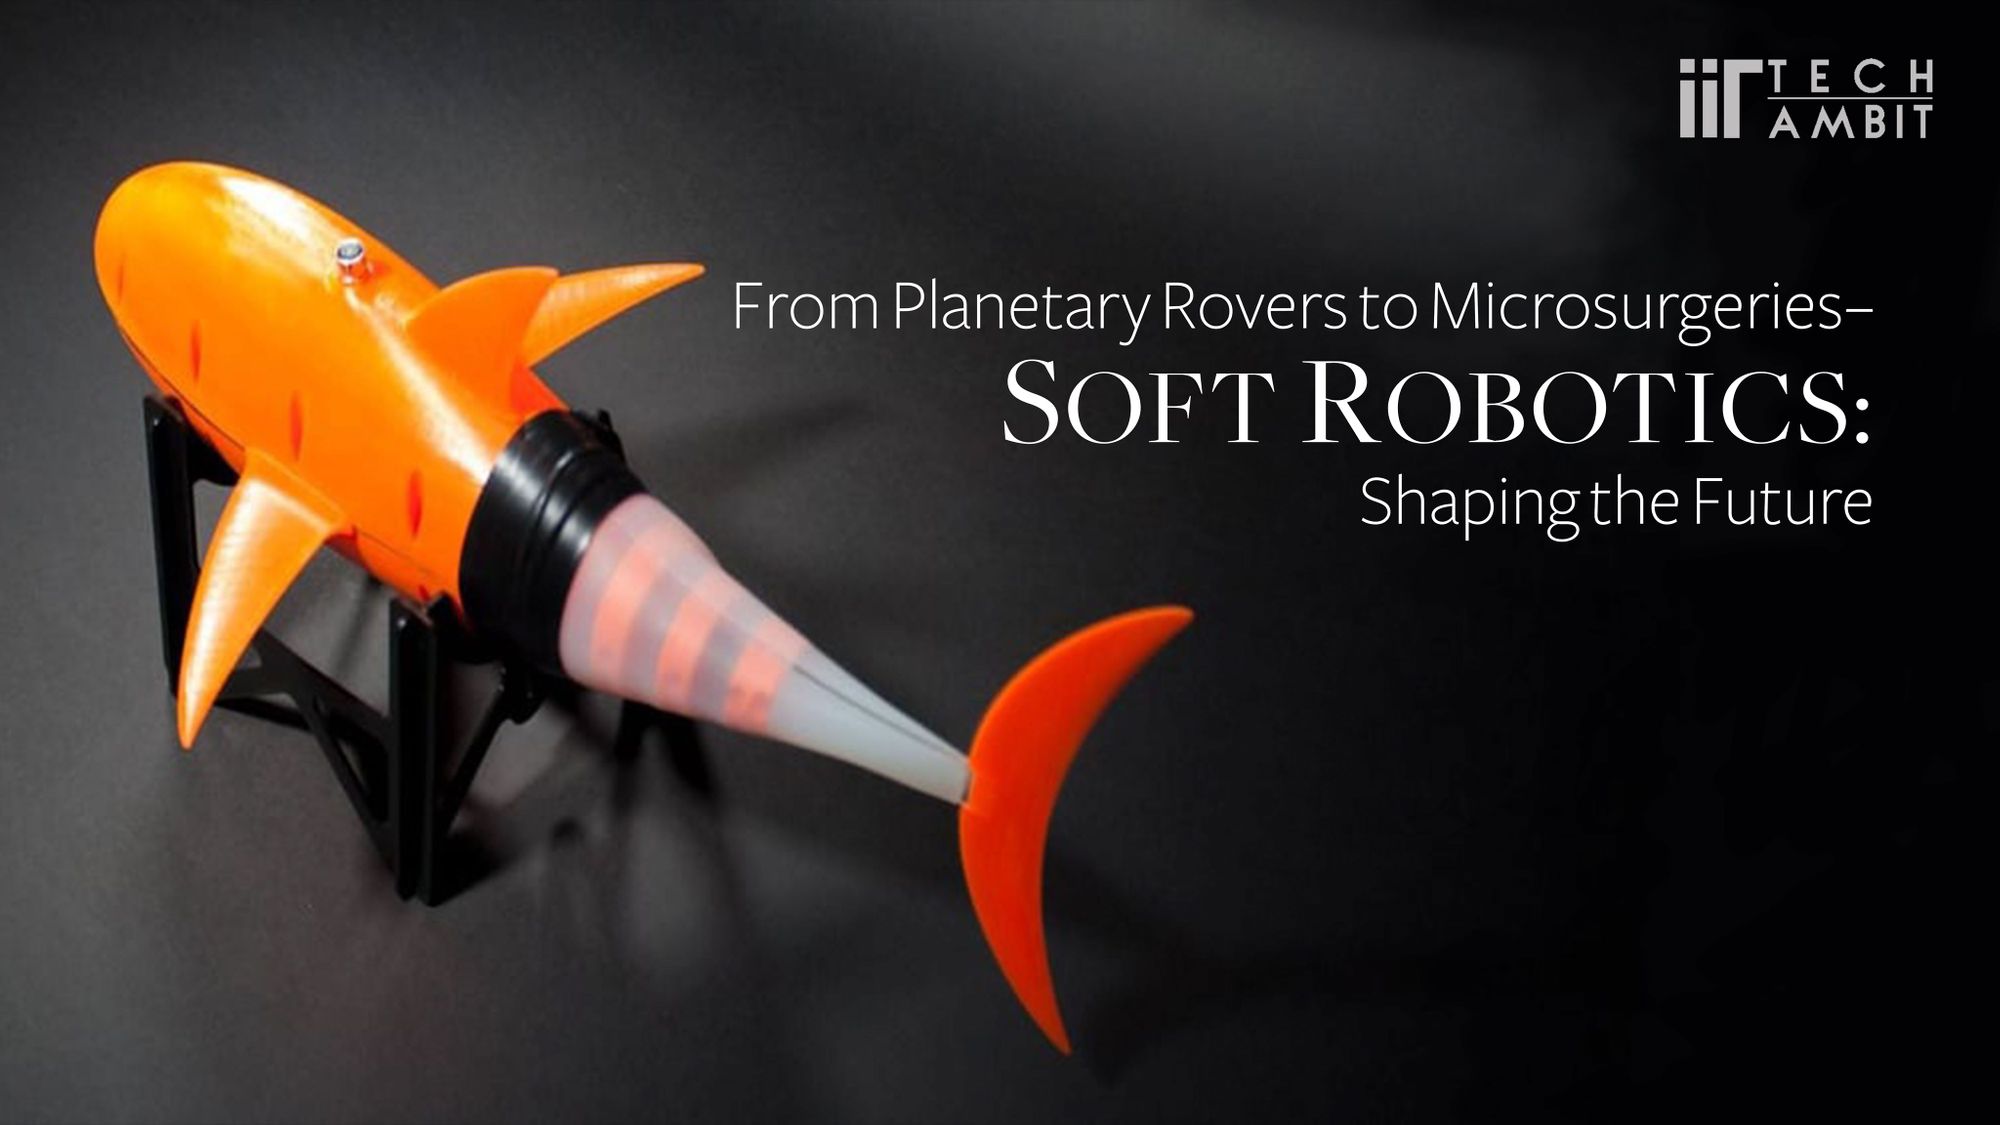 From Planetary Rovers to Microsurgeries–Soft Robotics: Shaping the Future